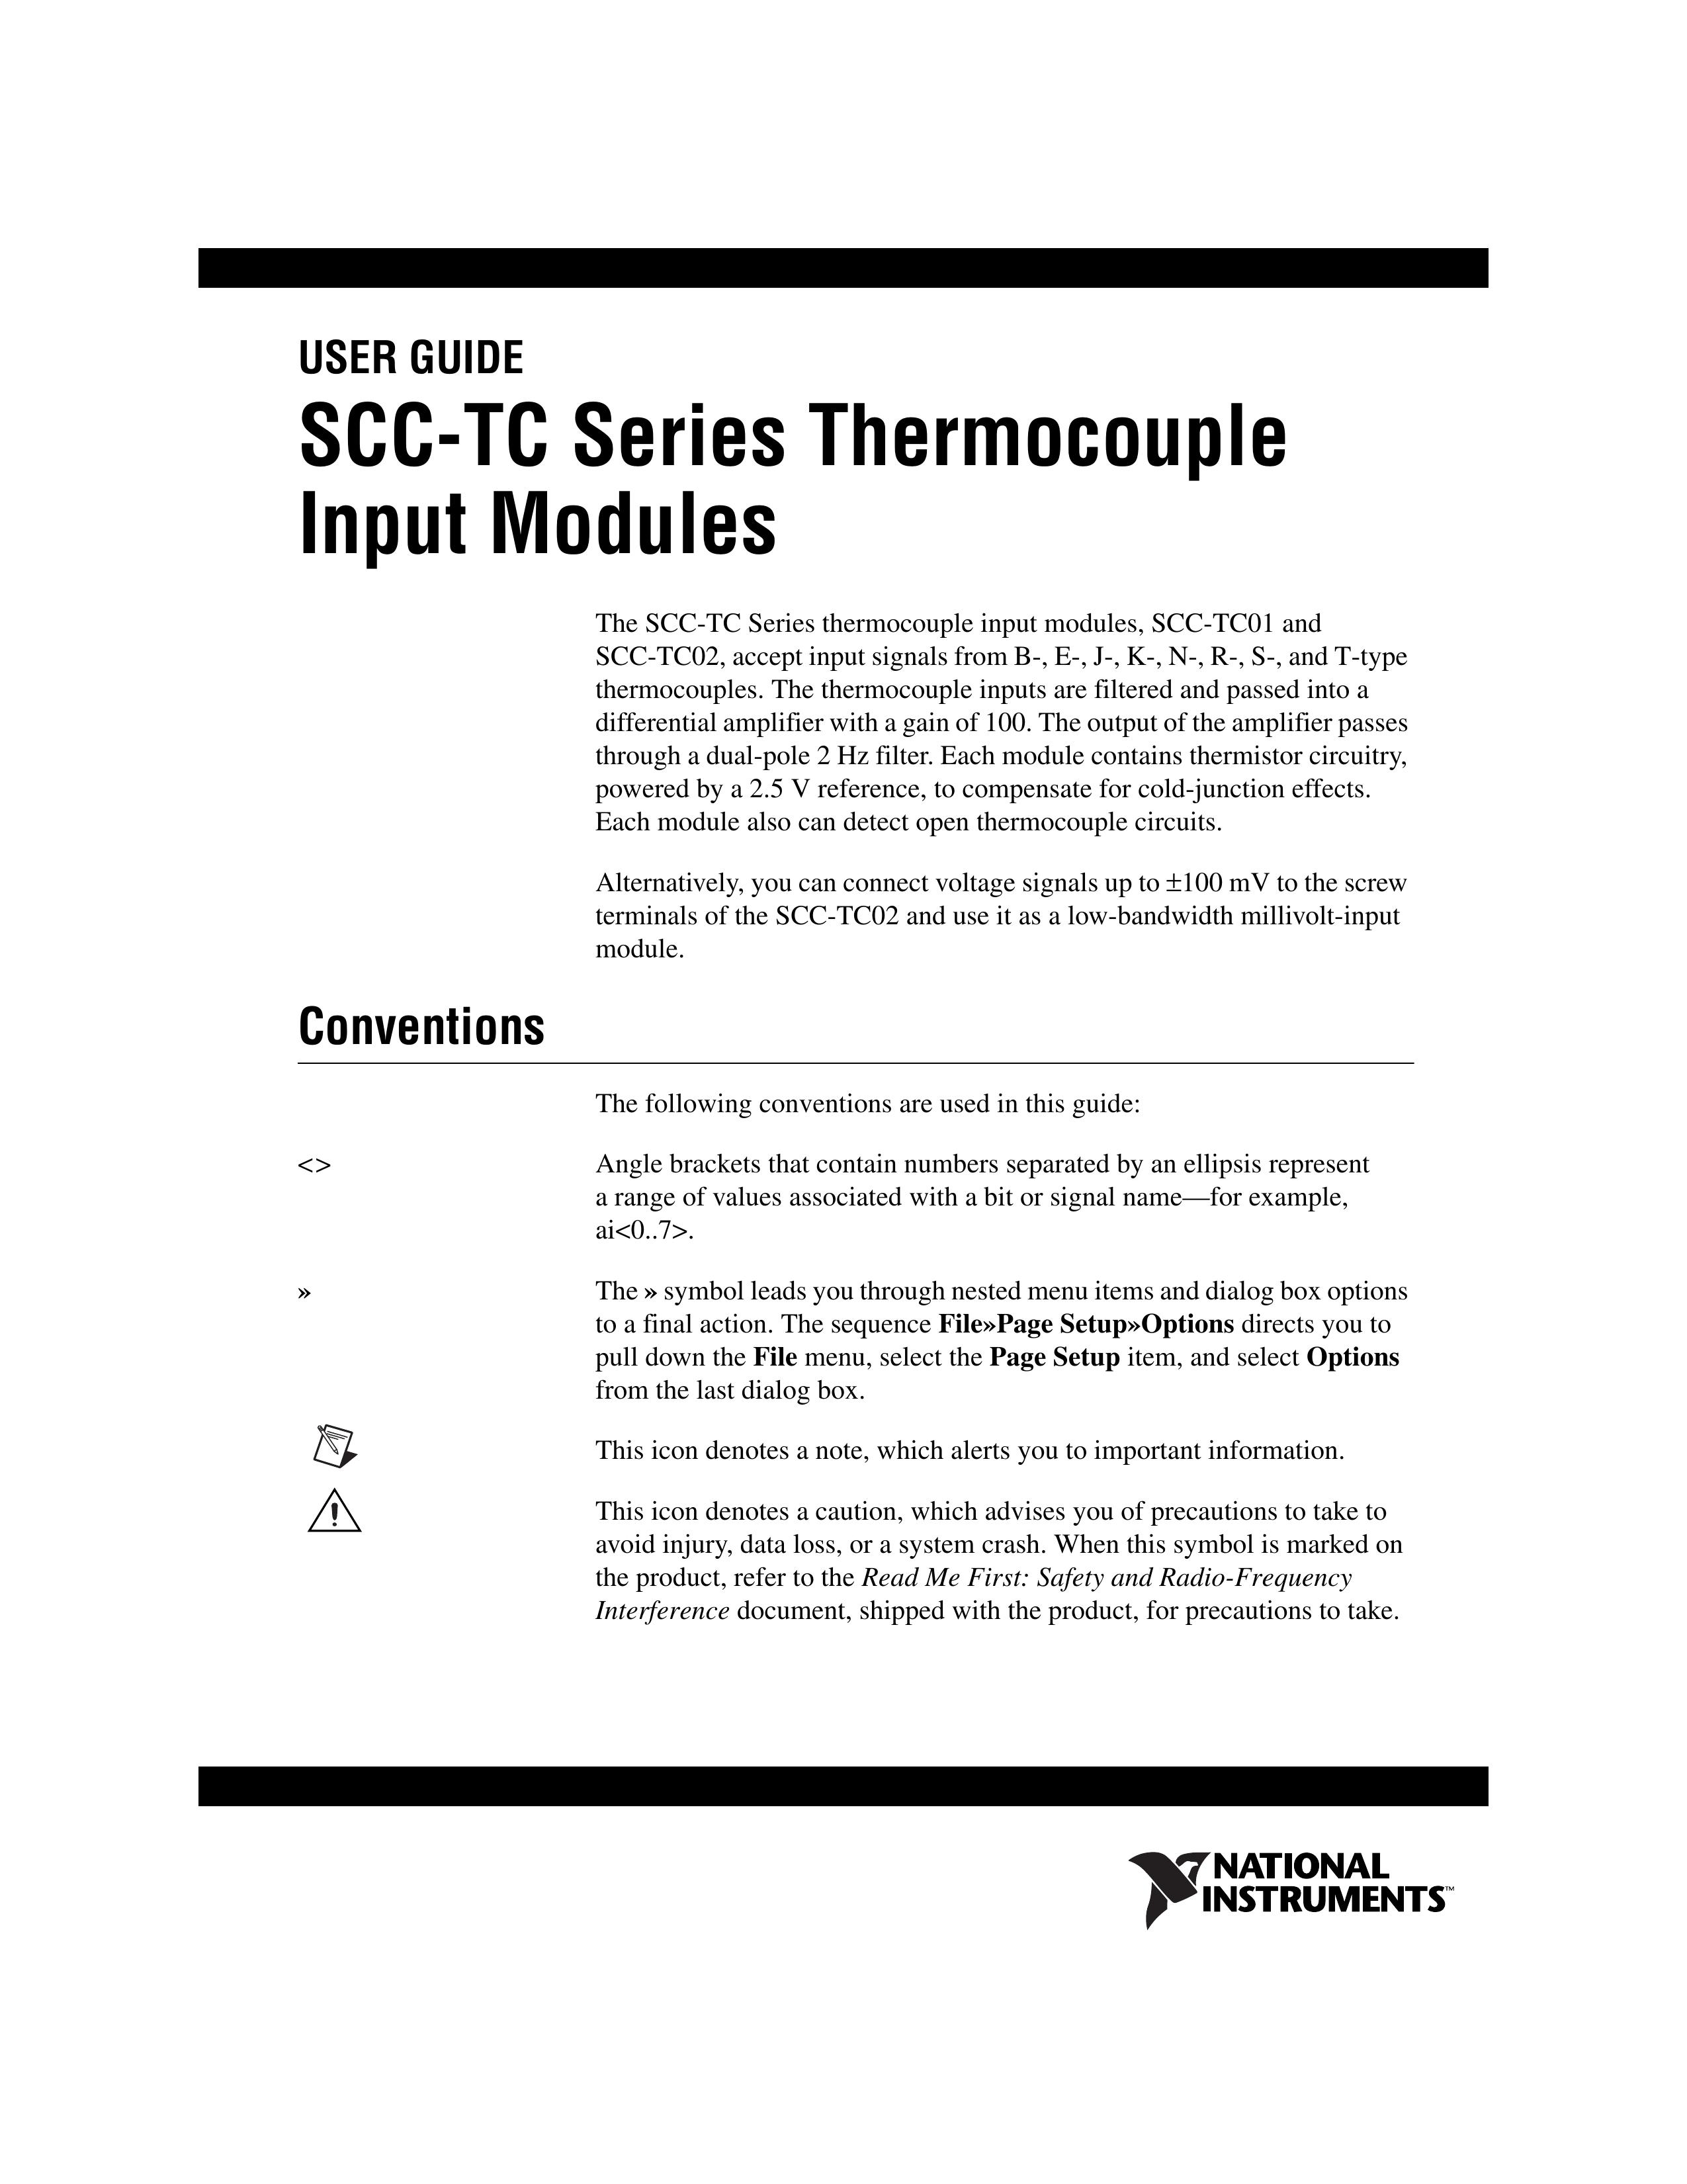 National Instruments SCC-TC Series Thermocouple Input Modules Thermometer User Manual